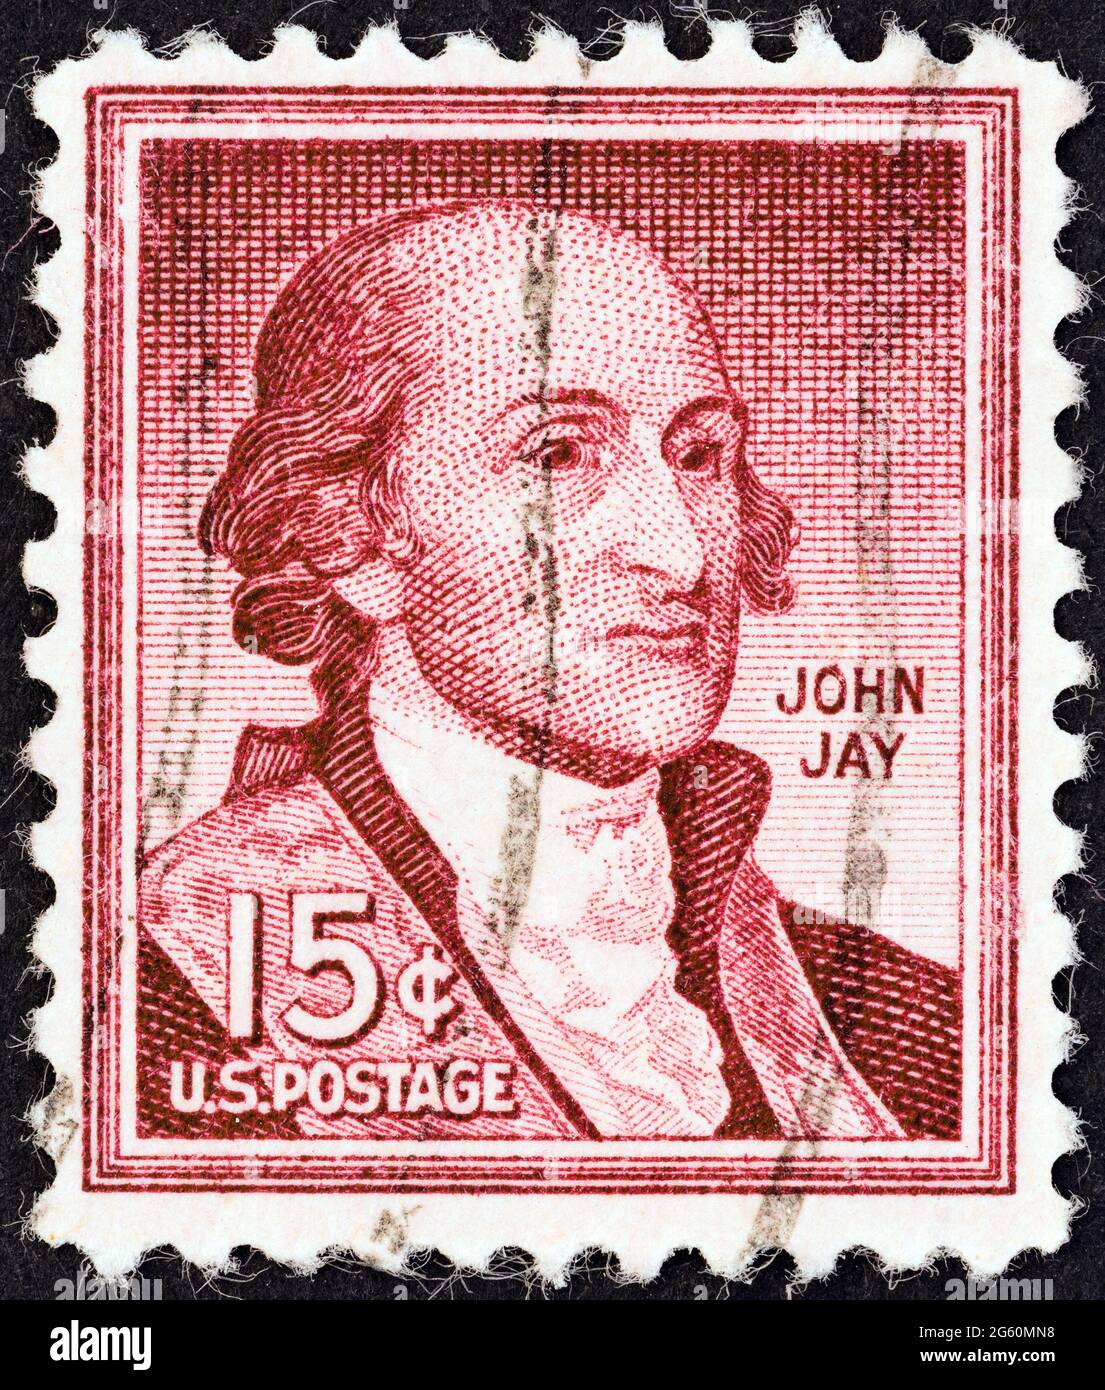 USA - CIRCA 1954: A stamp printed in USA from the 'Liberty' issue shows John Jay, circa 1954. Stock Photo